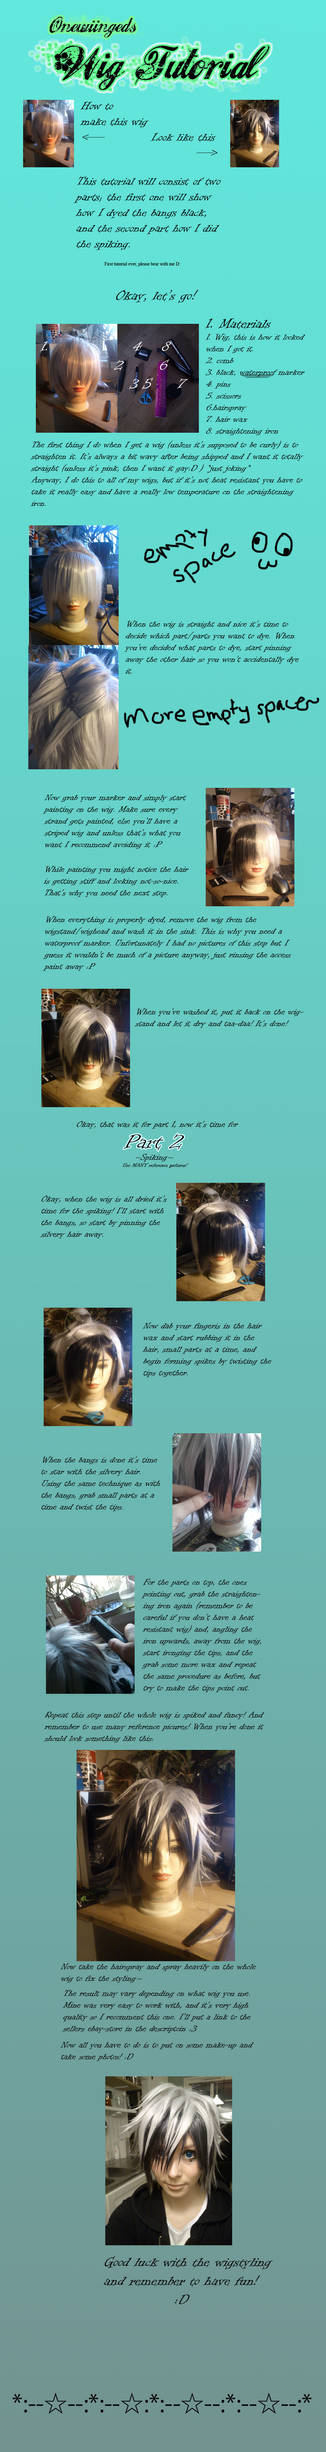 Tutorial: Wig dyeing and spiking